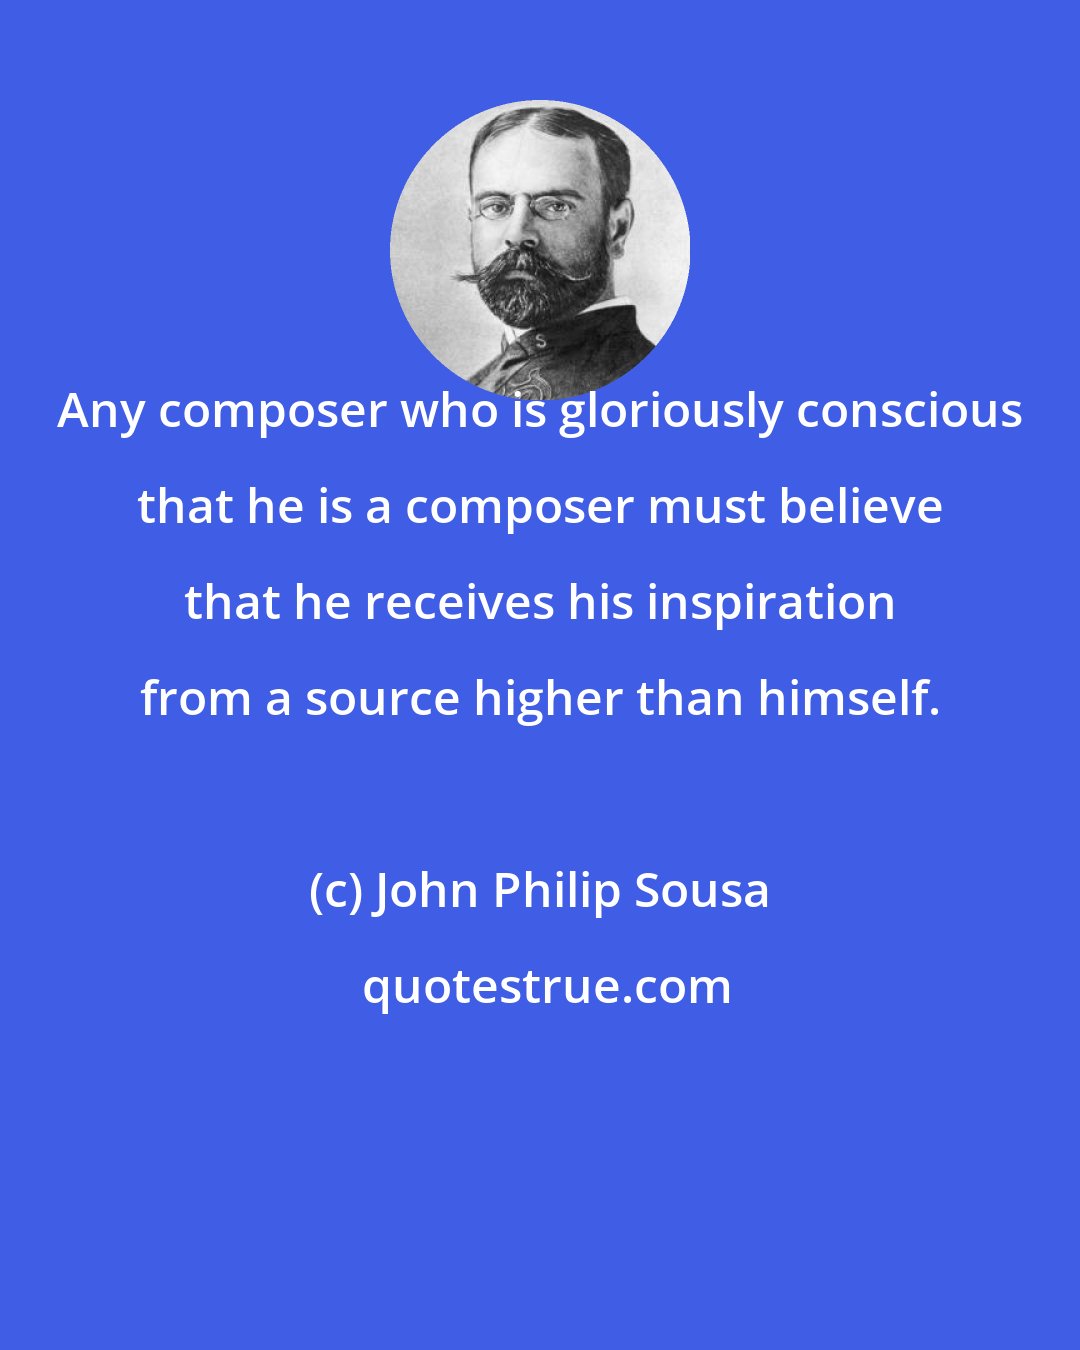 John Philip Sousa: Any composer who is gloriously conscious that he is a composer must believe that he receives his inspiration from a source higher than himself.